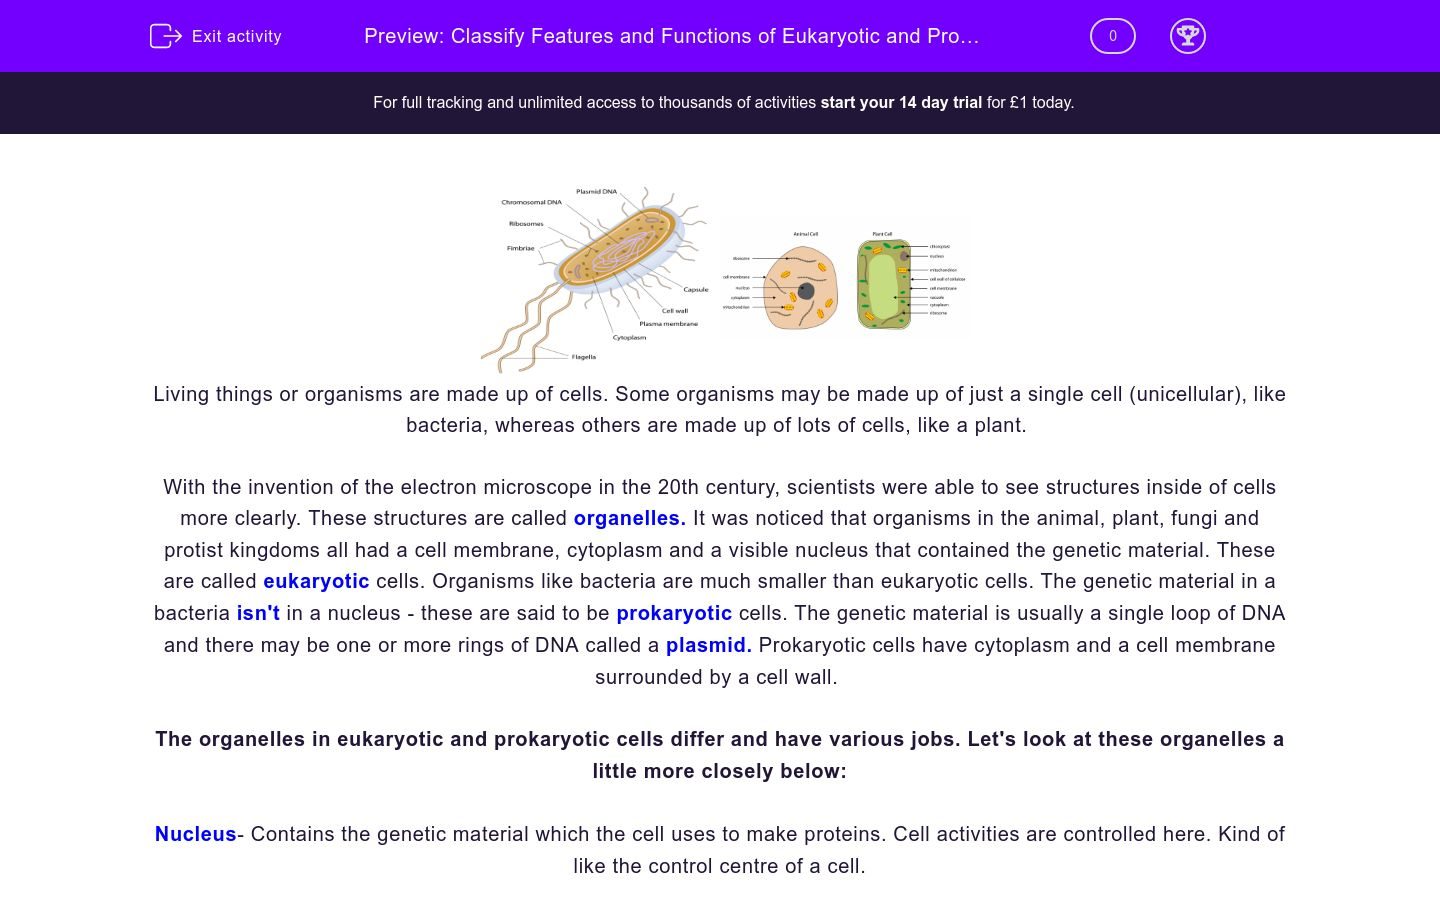 Classify Features and Functions of Eukaryotic and Prokaryotic Cells